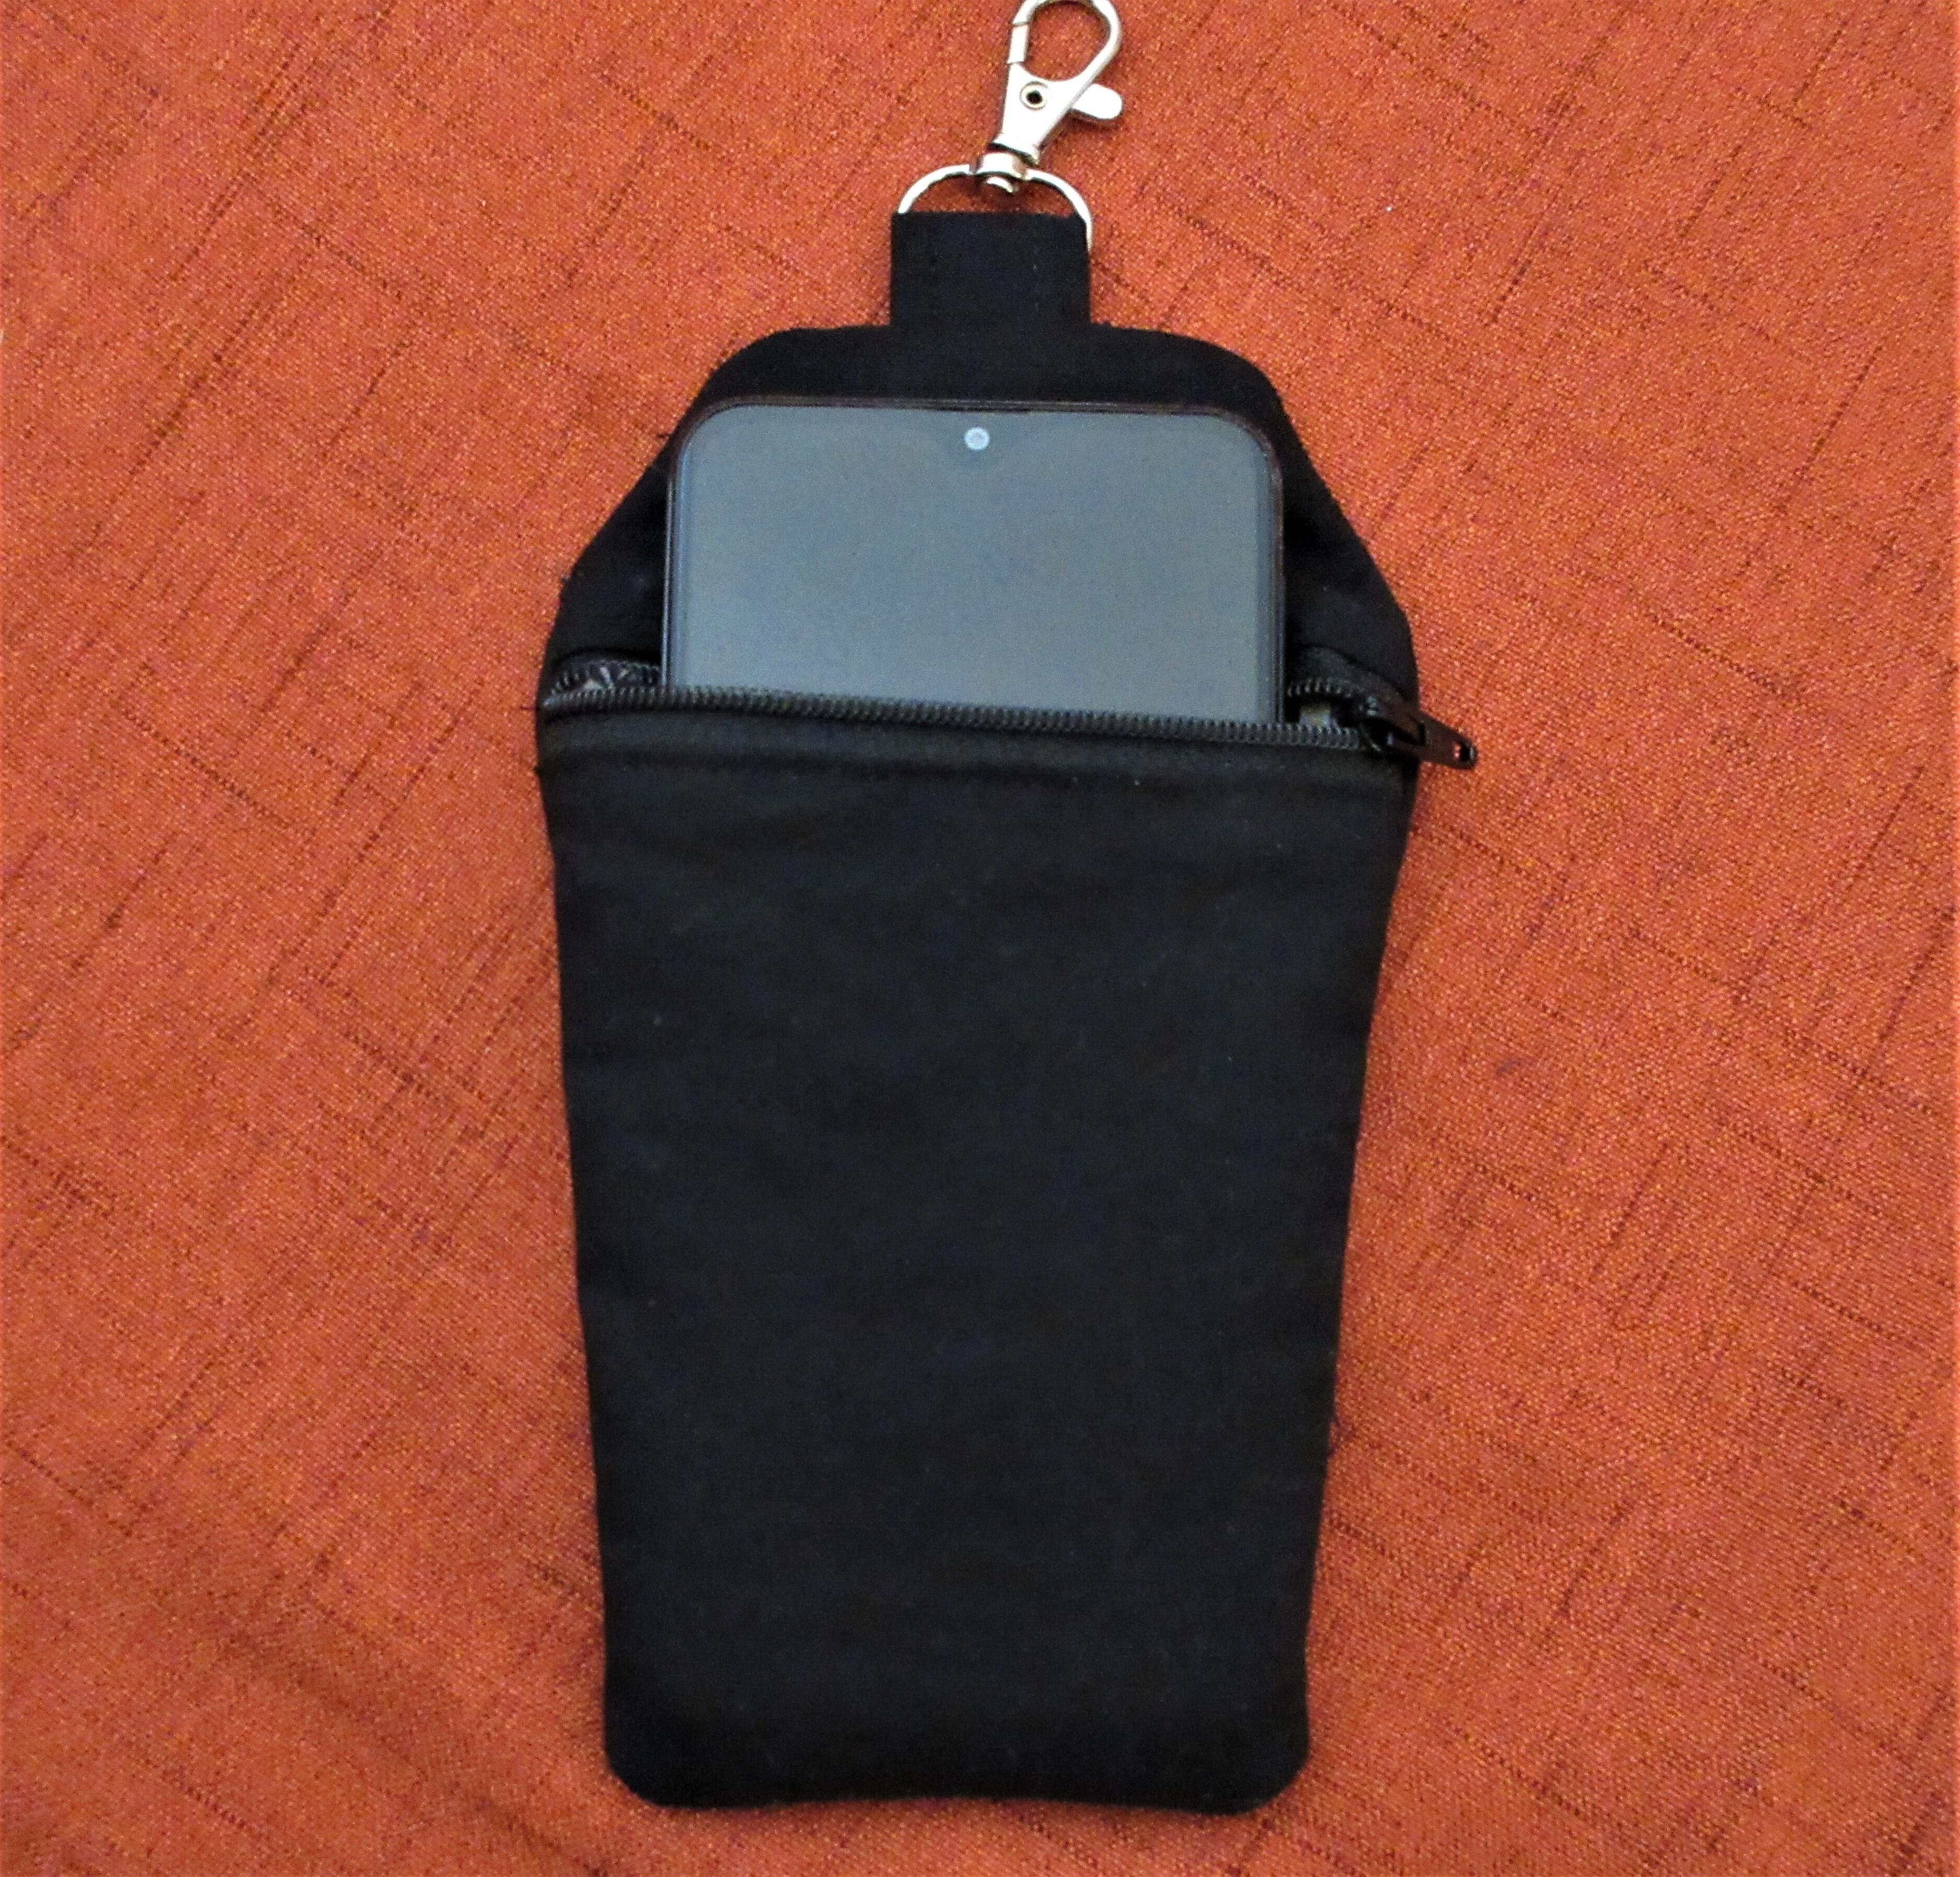 Coffin Shaped dog poop bag holder or treat pouch handcrafted in the USA by A Fur Baby Favorite